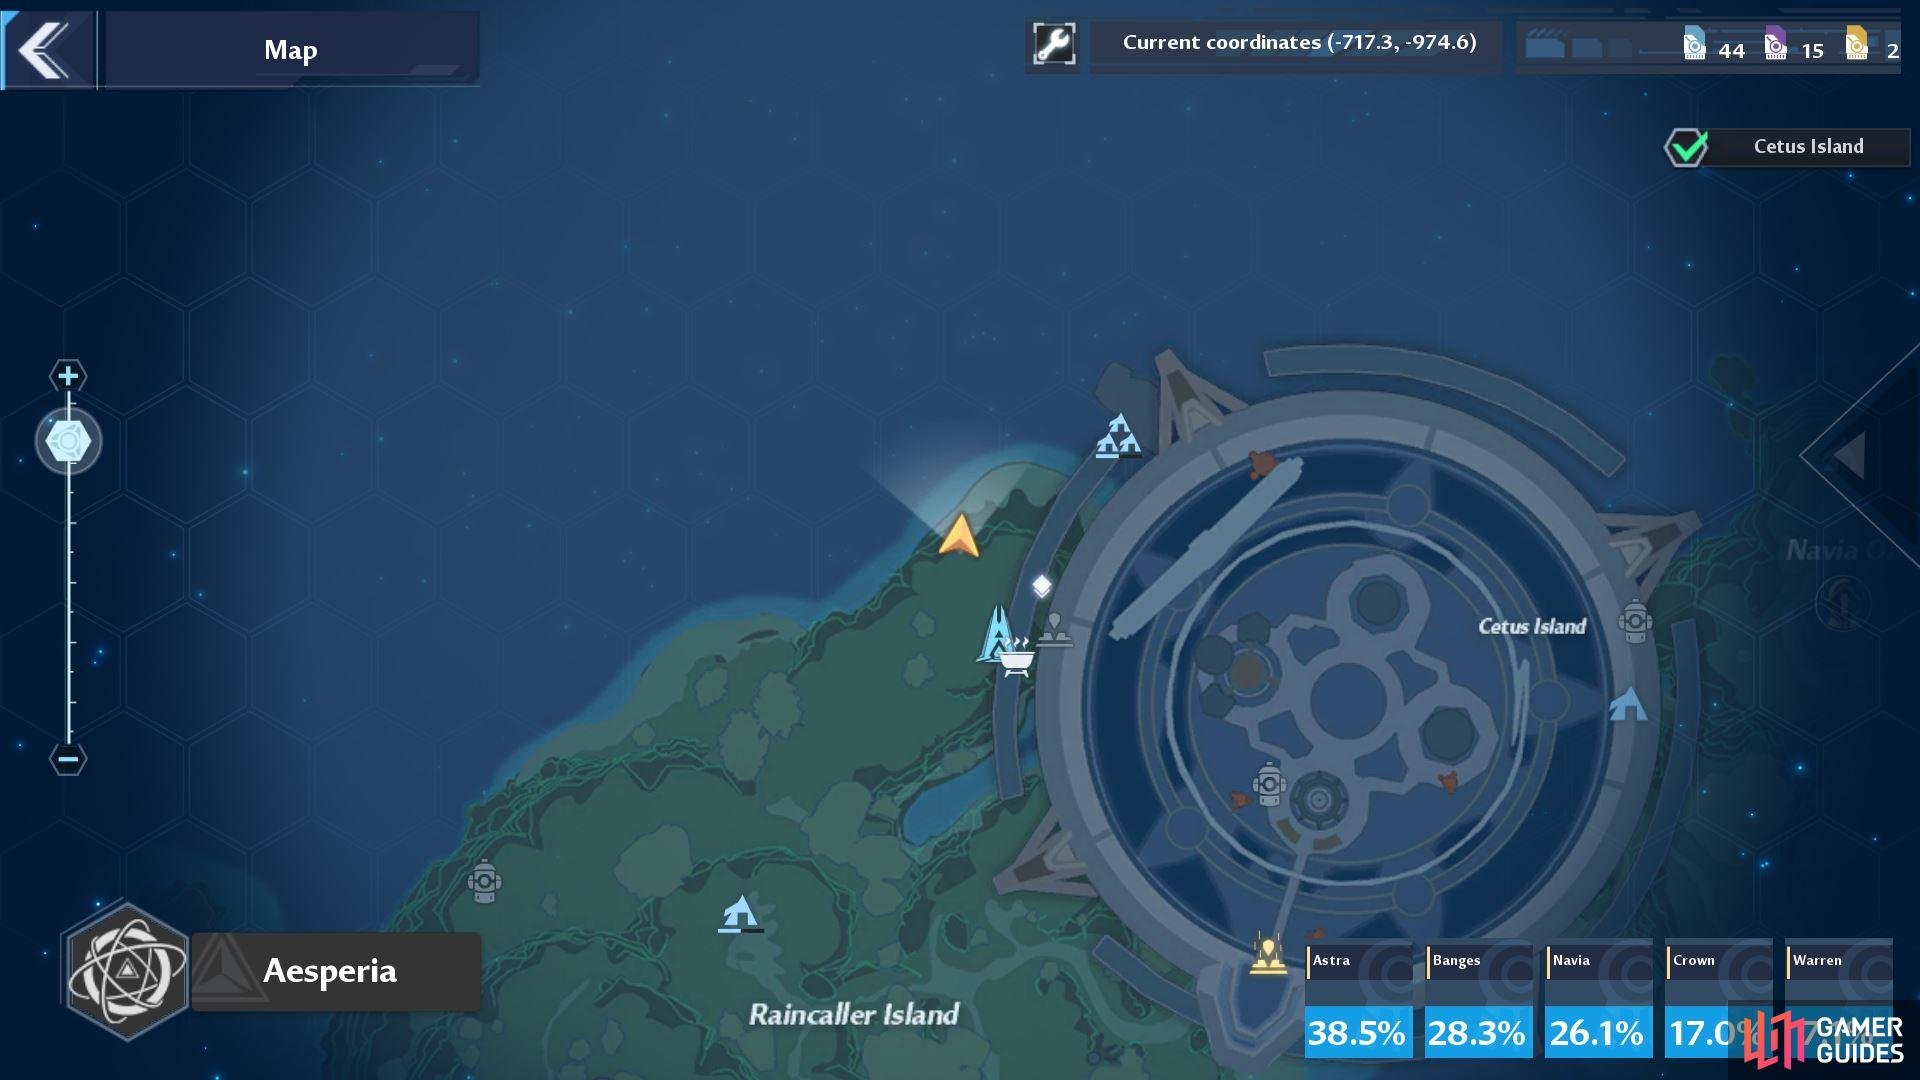 Here is how to find the location of the Tower of Fantasy Bootes telescope.